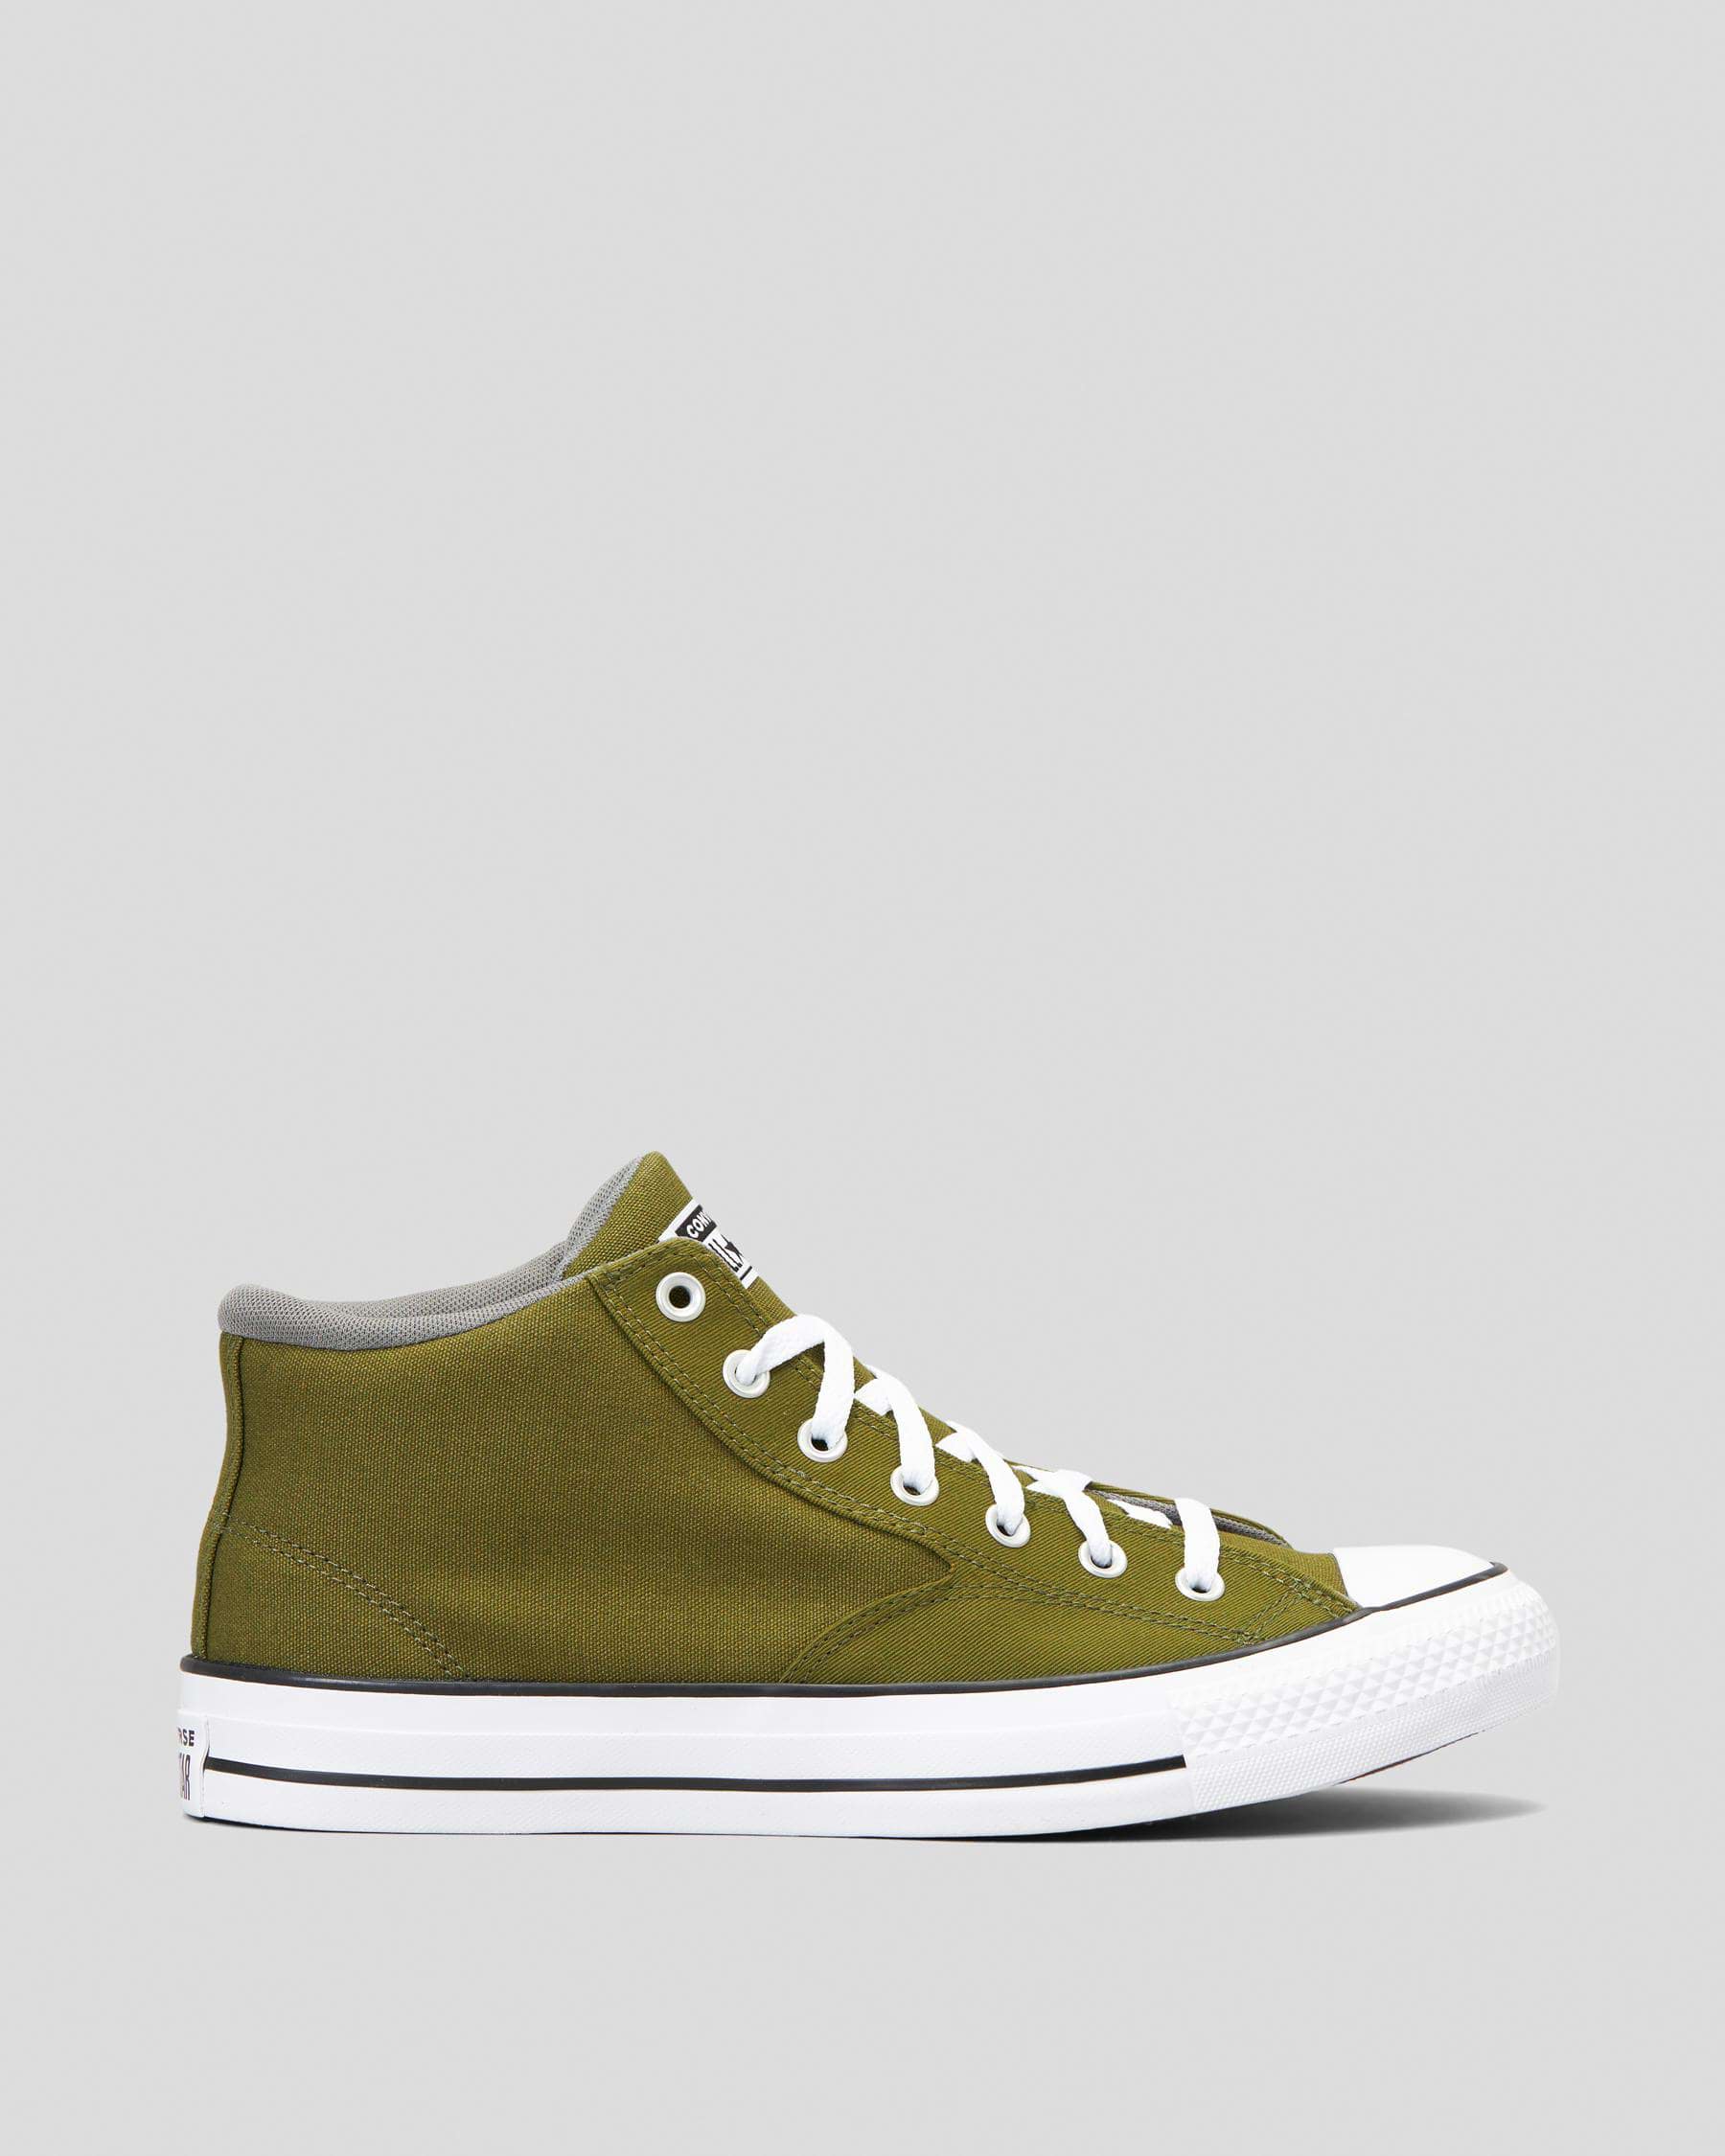 Converse Chuck Taylor All Star Malden Street Crafted Patchwork Shoes In ...